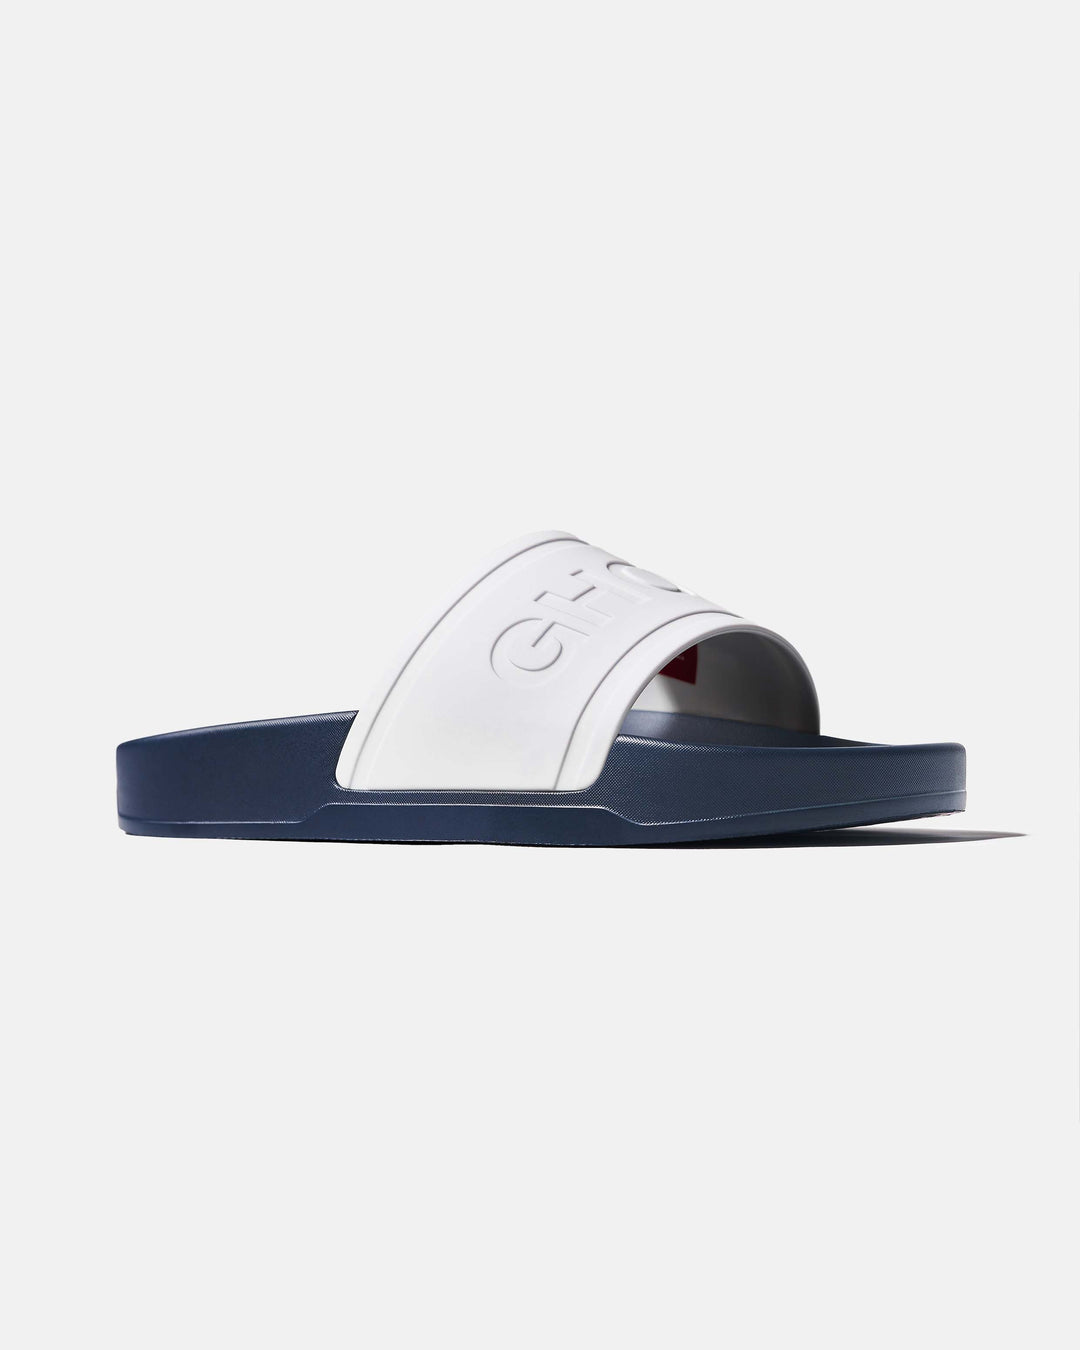 Navy and White Slides Footwear